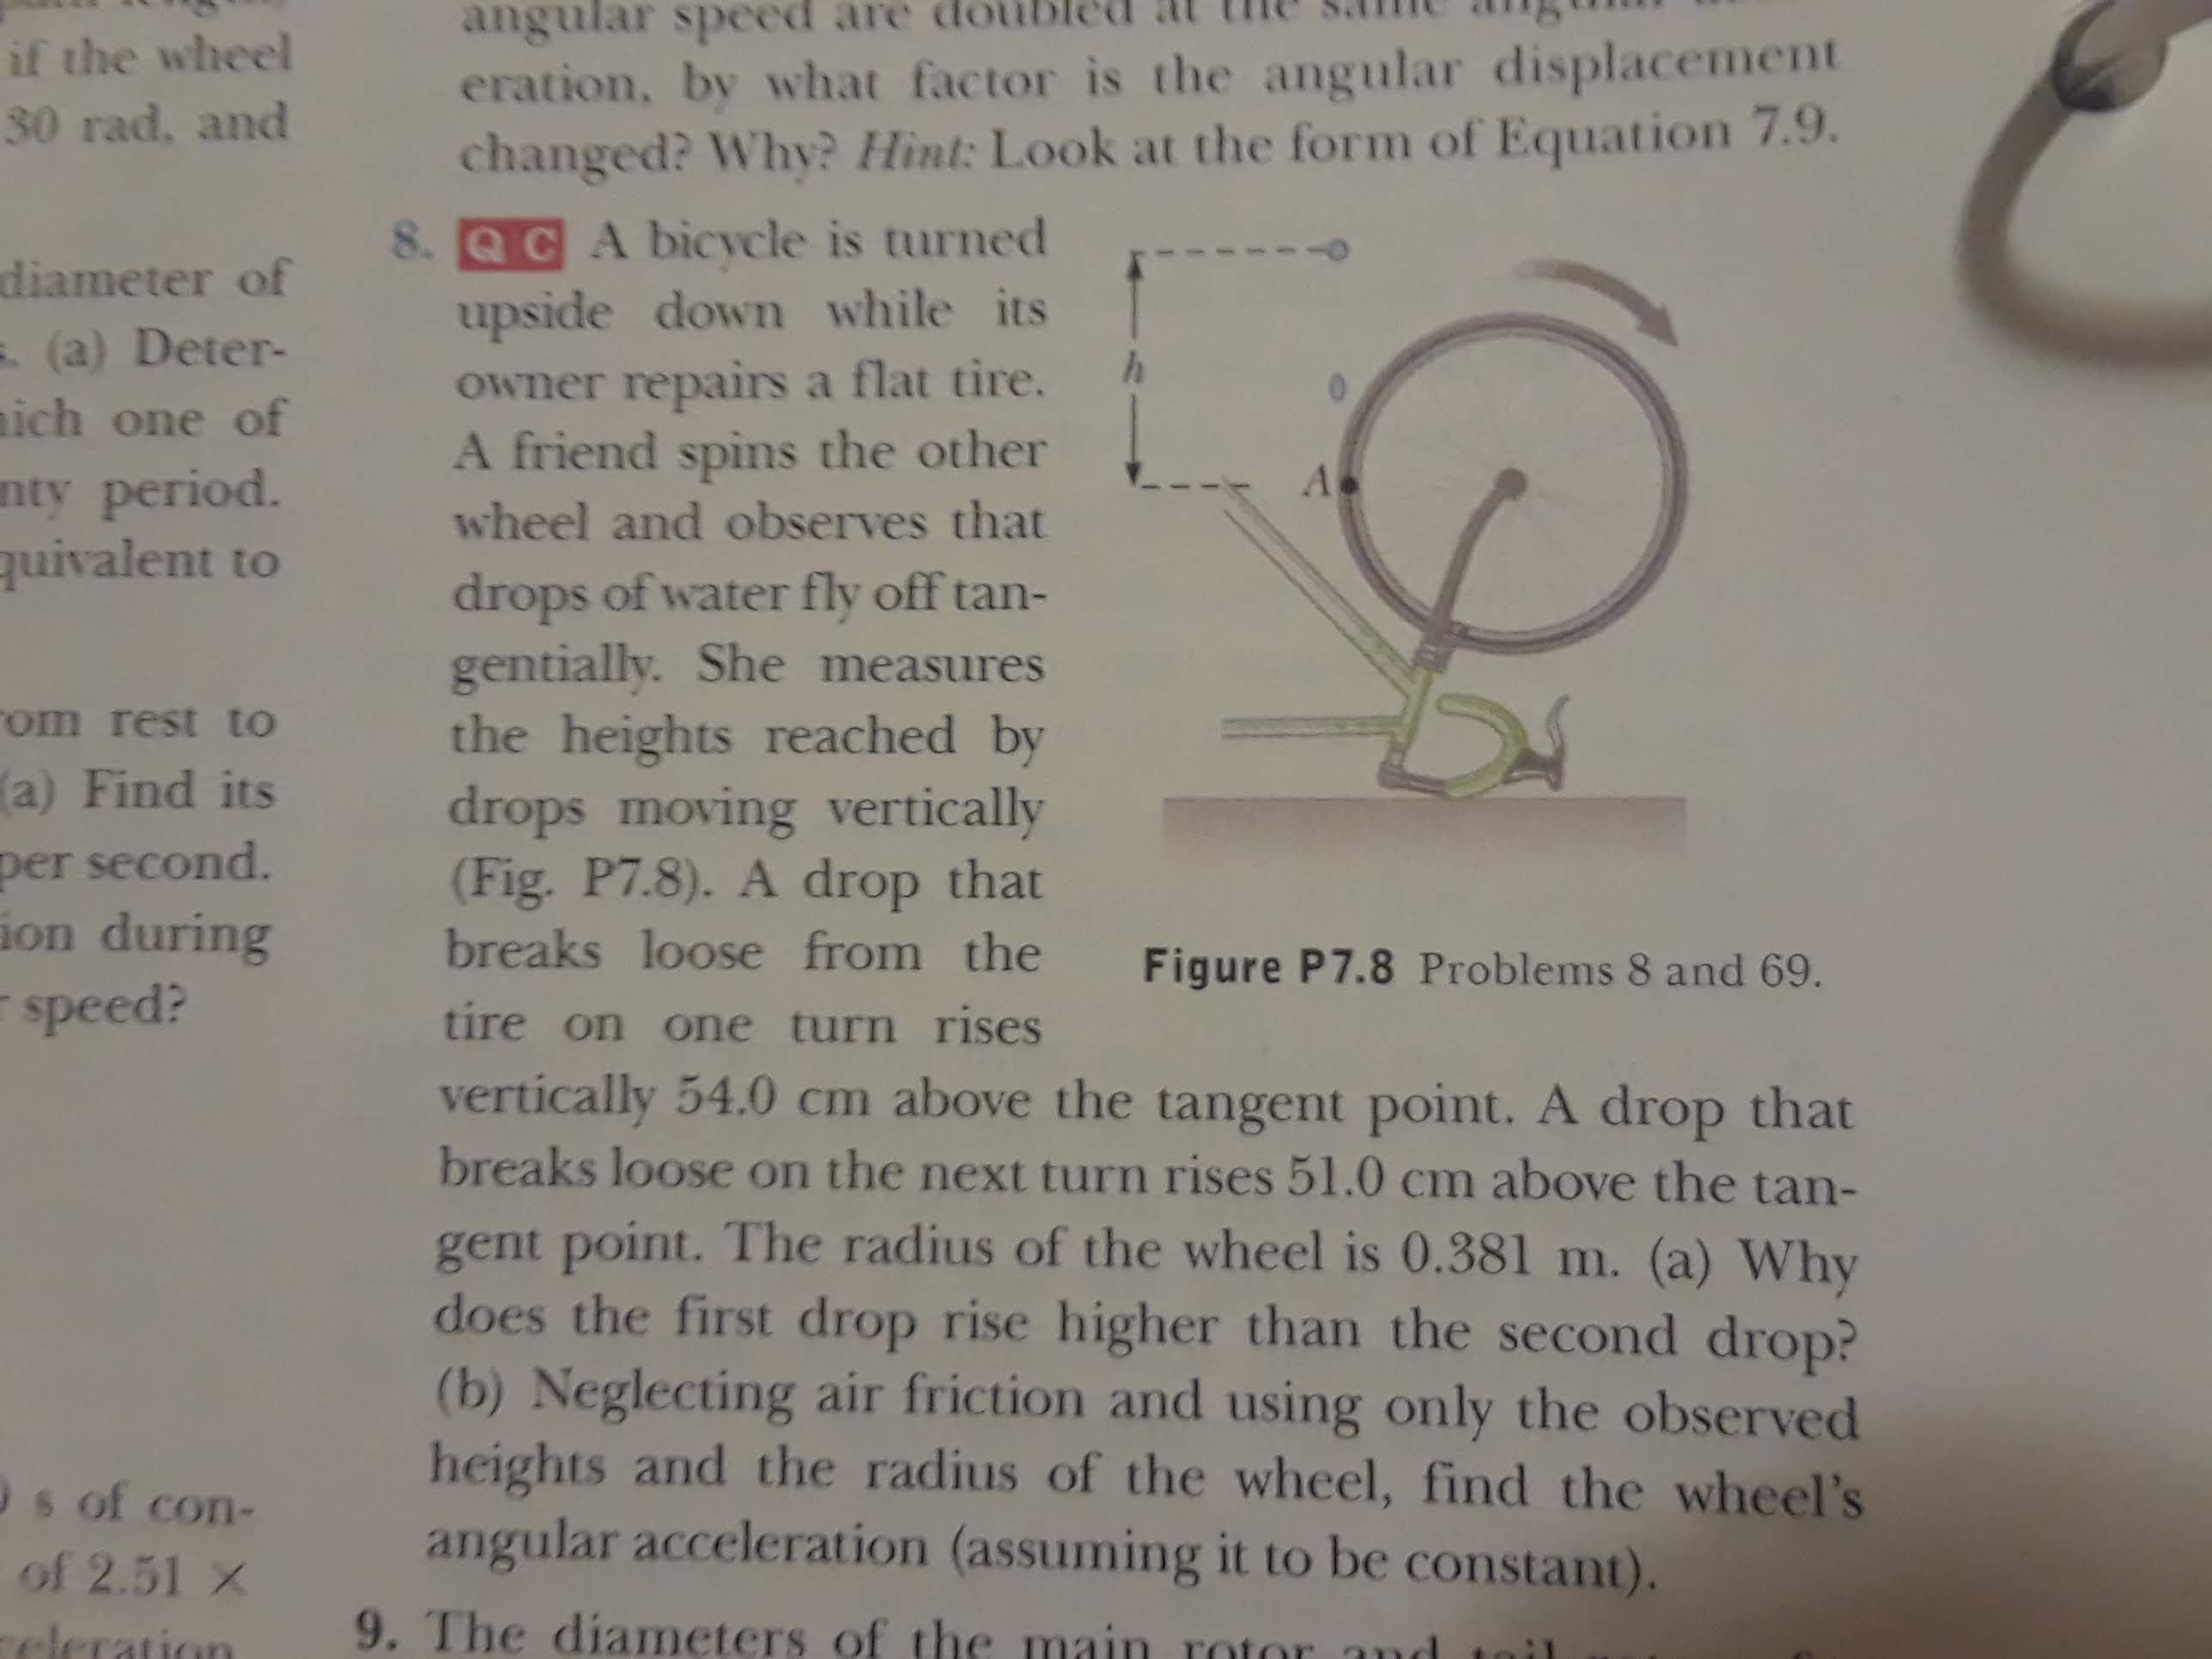 angular speed are dou
eration, by what factor is the angular displacement
changed? Why? Hint: Look at the form of Equation 7.9.
8. QCA bicycle is turned
upside down while its
owner repairs a flat tire.
A friend spins the other
if the wheel
30 rad, and
diameter of
. (a) Deter-
ich one of
nty period.
quivalent to
0
A
wheel and observes that
drops of water fly off tan-
gentially. She measures
the heights reached by
drops moving vertically
(Fig. P7.8). A drop that
breaks loose from the
om rest to
a) Find its
per second.
ion during
speed?
Figure P7.8 Problems 8 and 69.
tire on one turn rises
vertically 54.0 cm above the tangent point. A drop that
breaks loose on the next turn rises 51.0 cm above the tan-
gent point. The radius of the wheel is 0.381 m. (a) Why
does the first drop rise higher than the second drop?
(b) Neglecting air friction and using only the observed
heights and the radius of the wheel, find the wheel's
angular acceleration (assuming it to be constant).
s of con-
of 2.51 x
9. The diameters of the main rotor and
cleration
:1
